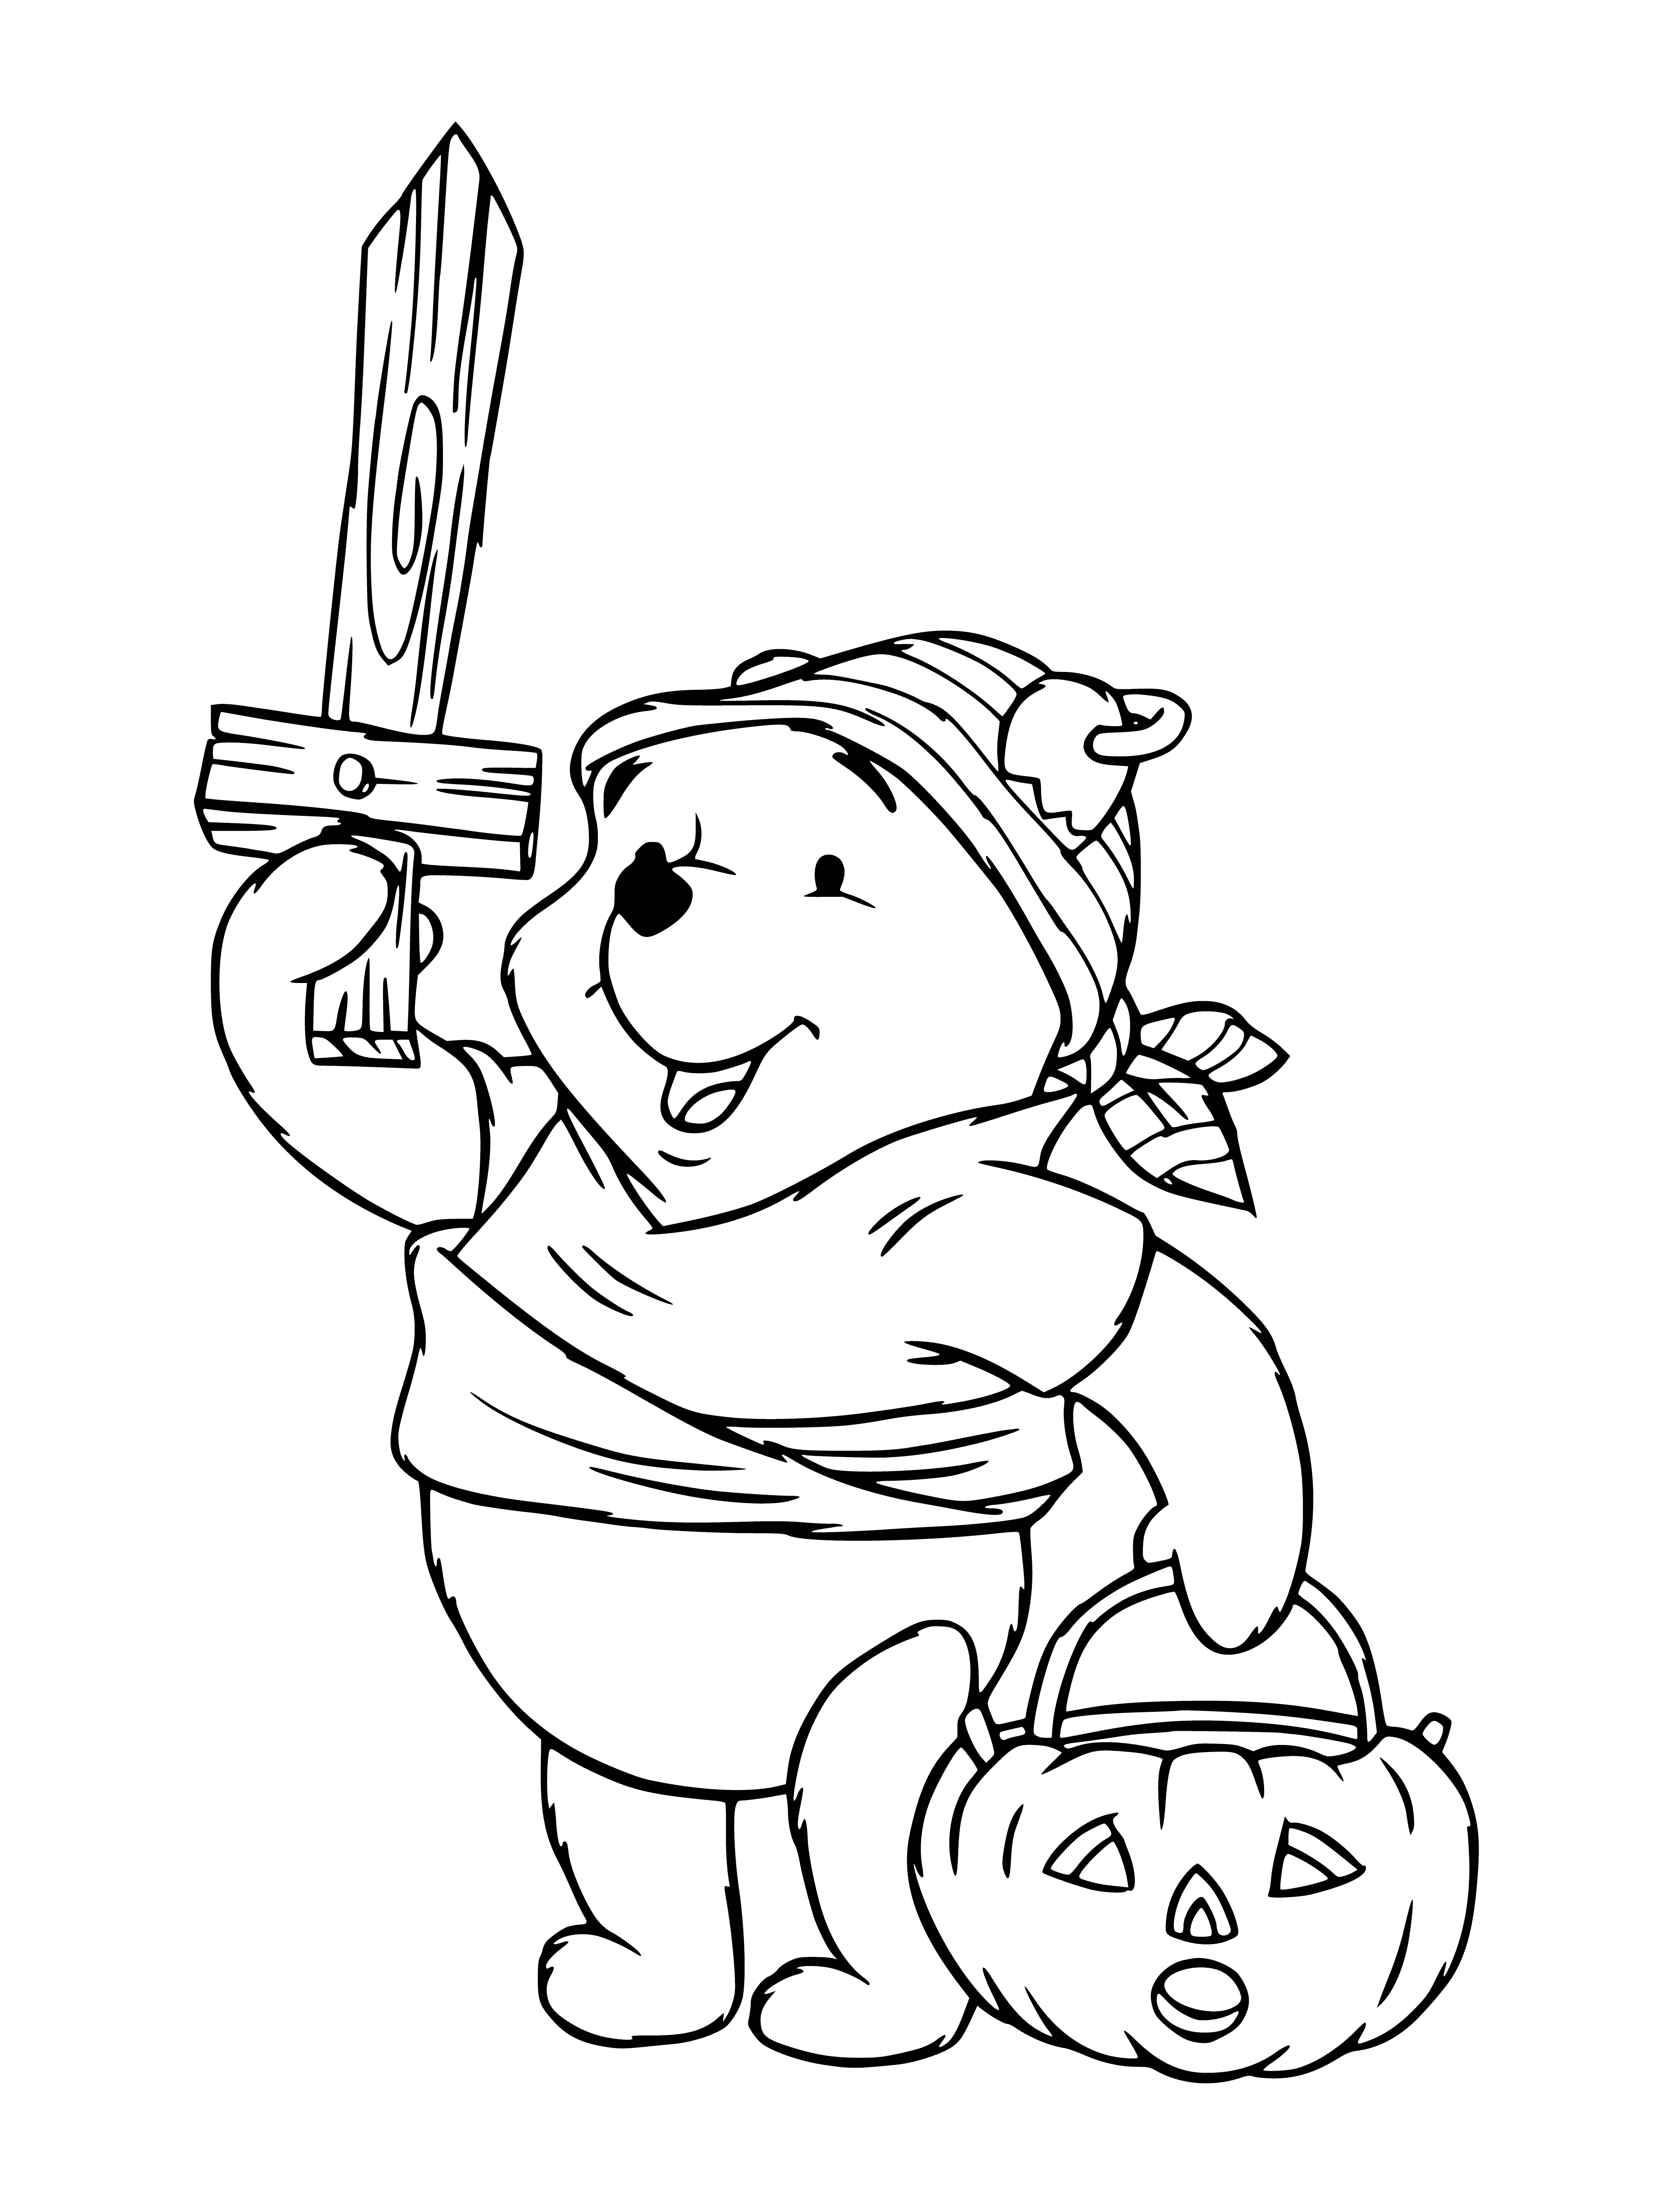 Winnie the Pooh on Halloween coloring page